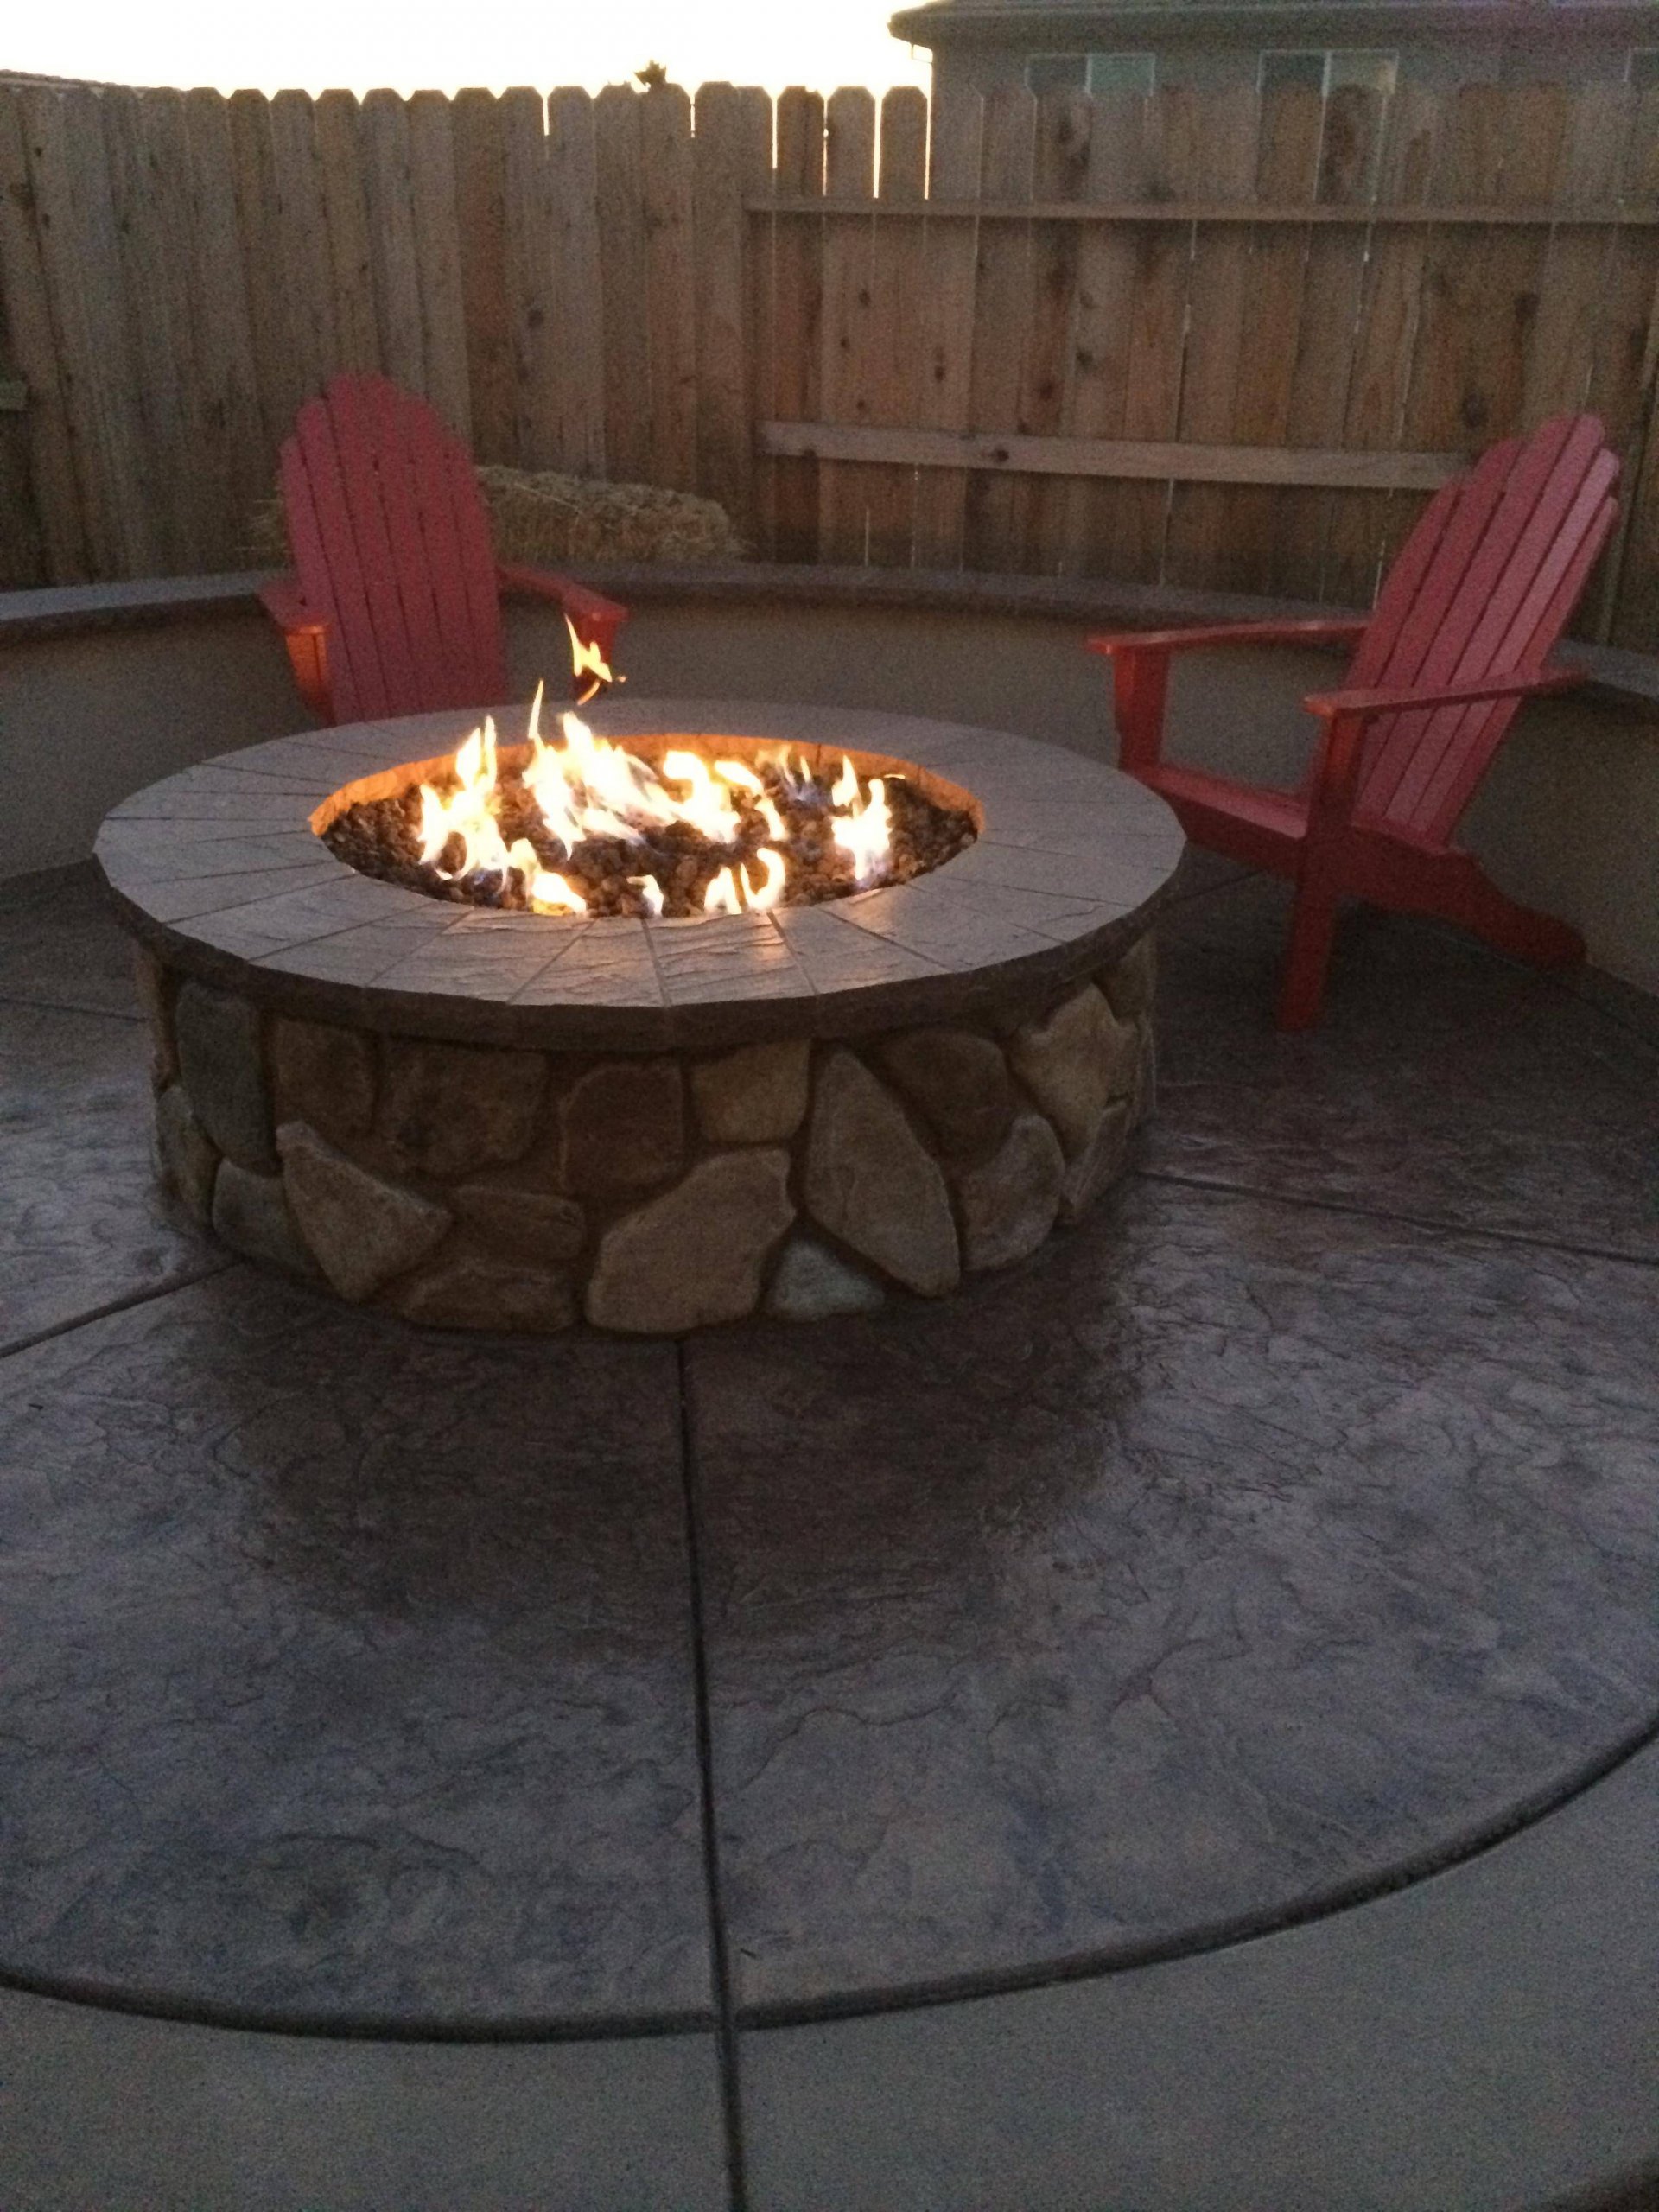 Fire Pit Ring Insert Ers Guide, What Is A Fire Pit Ring